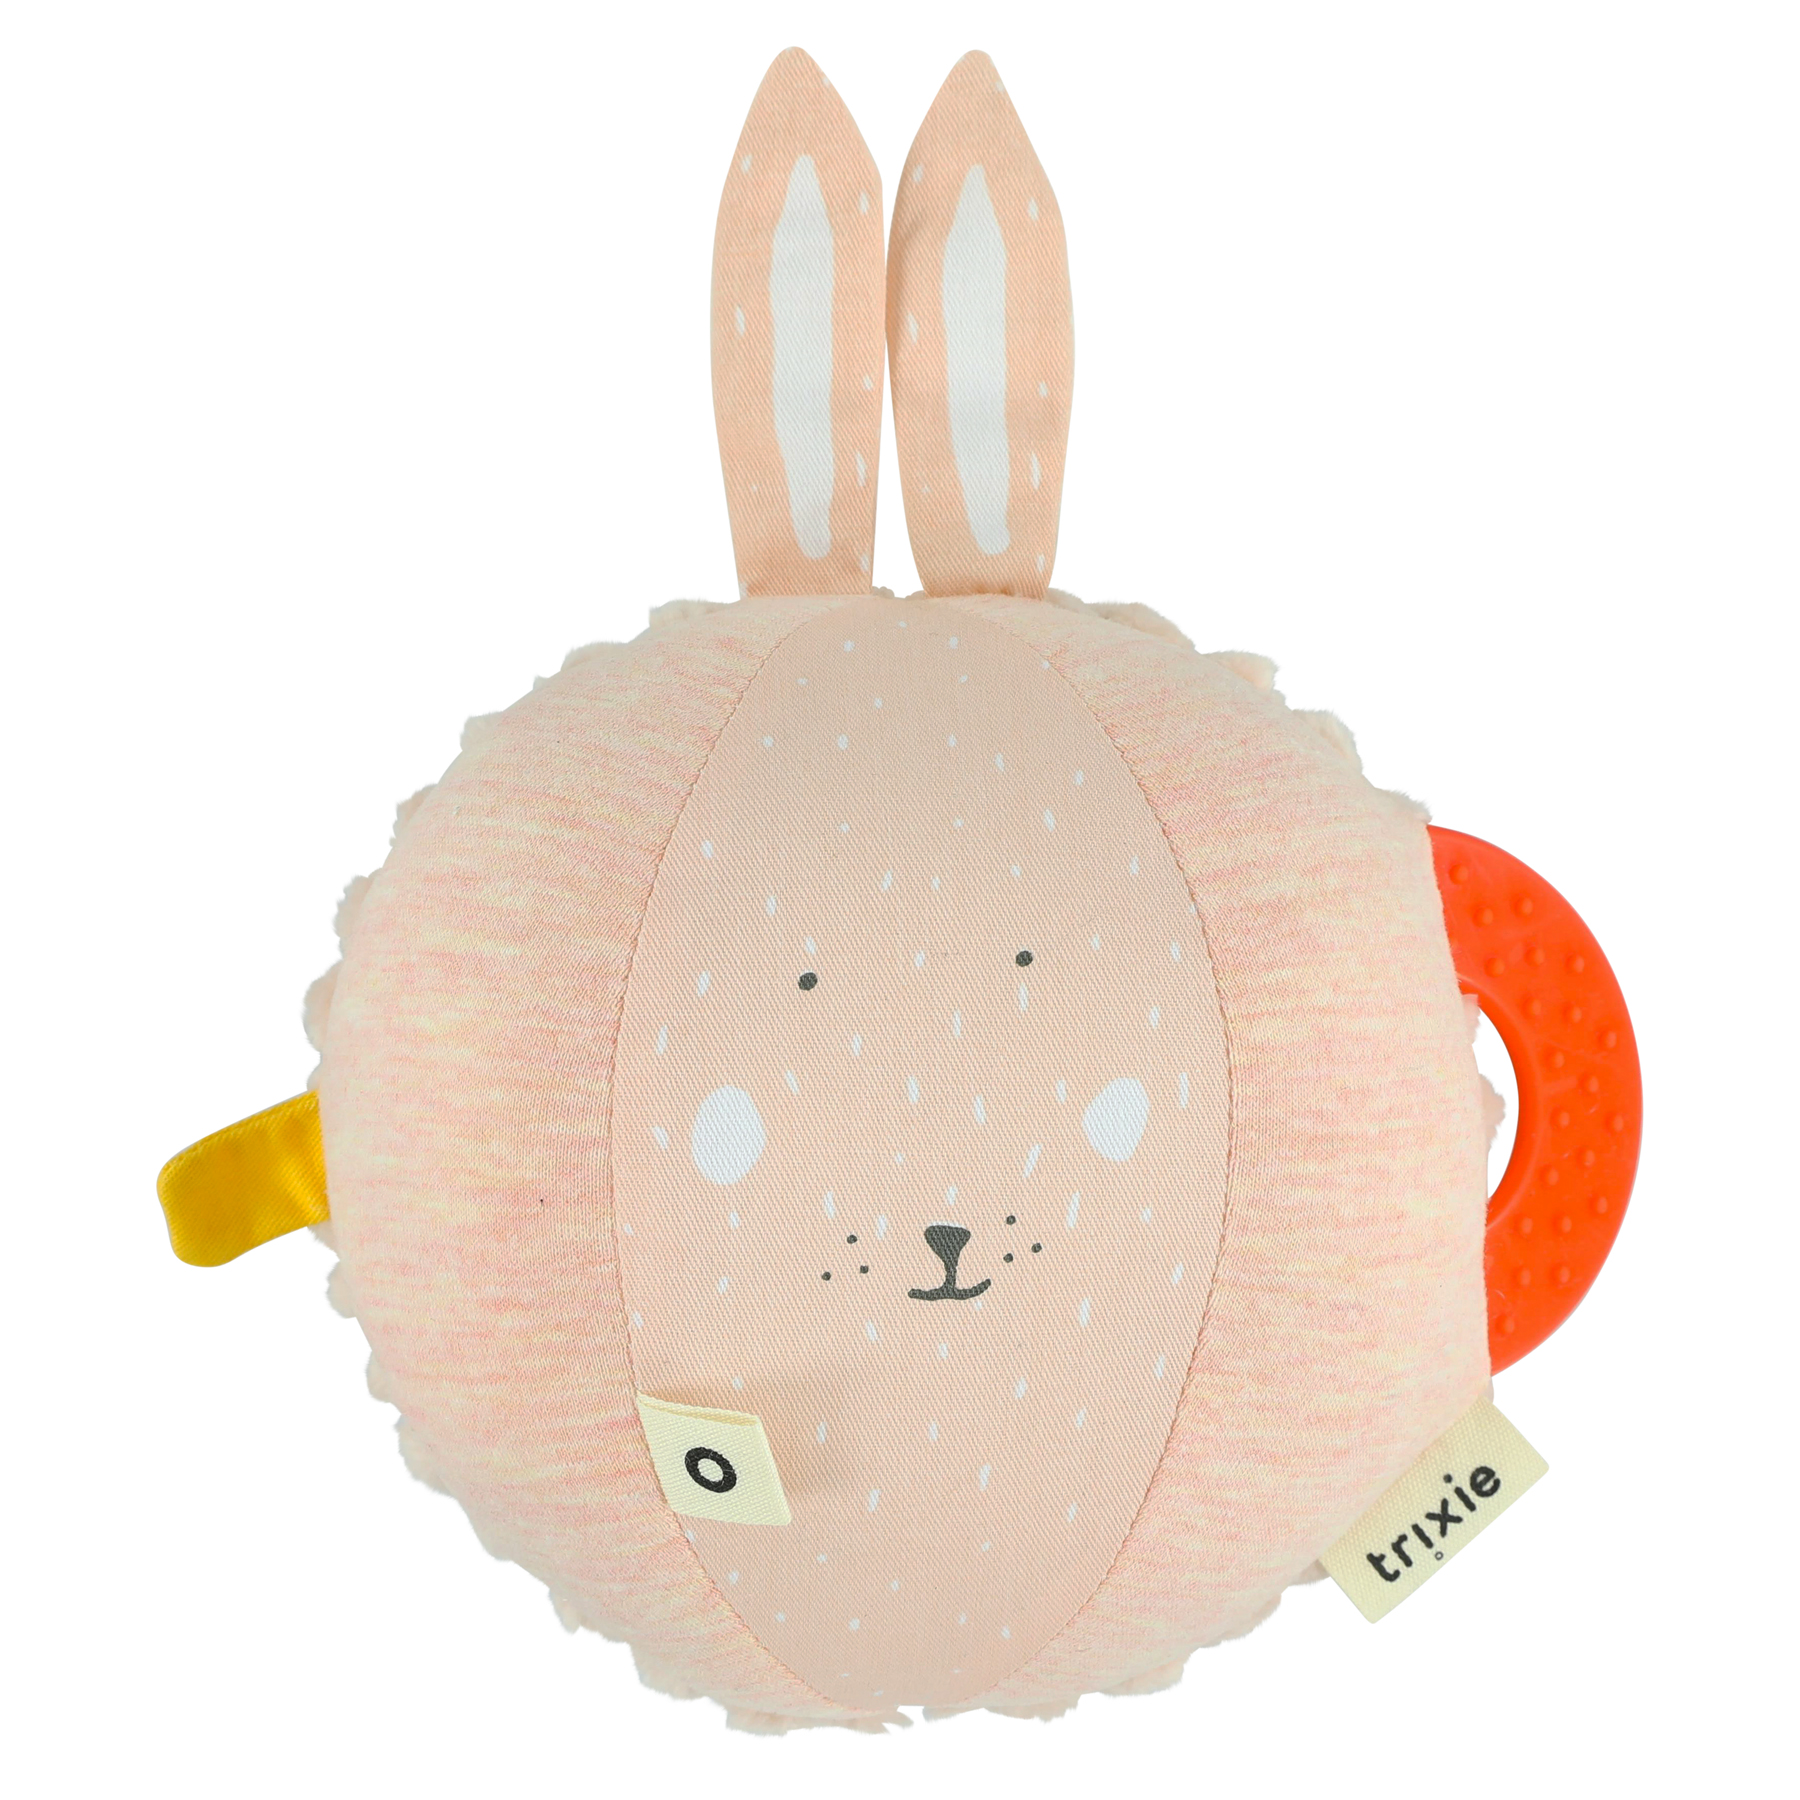 Trixie Mrs Rabbit Activity Ball Toy for Babies